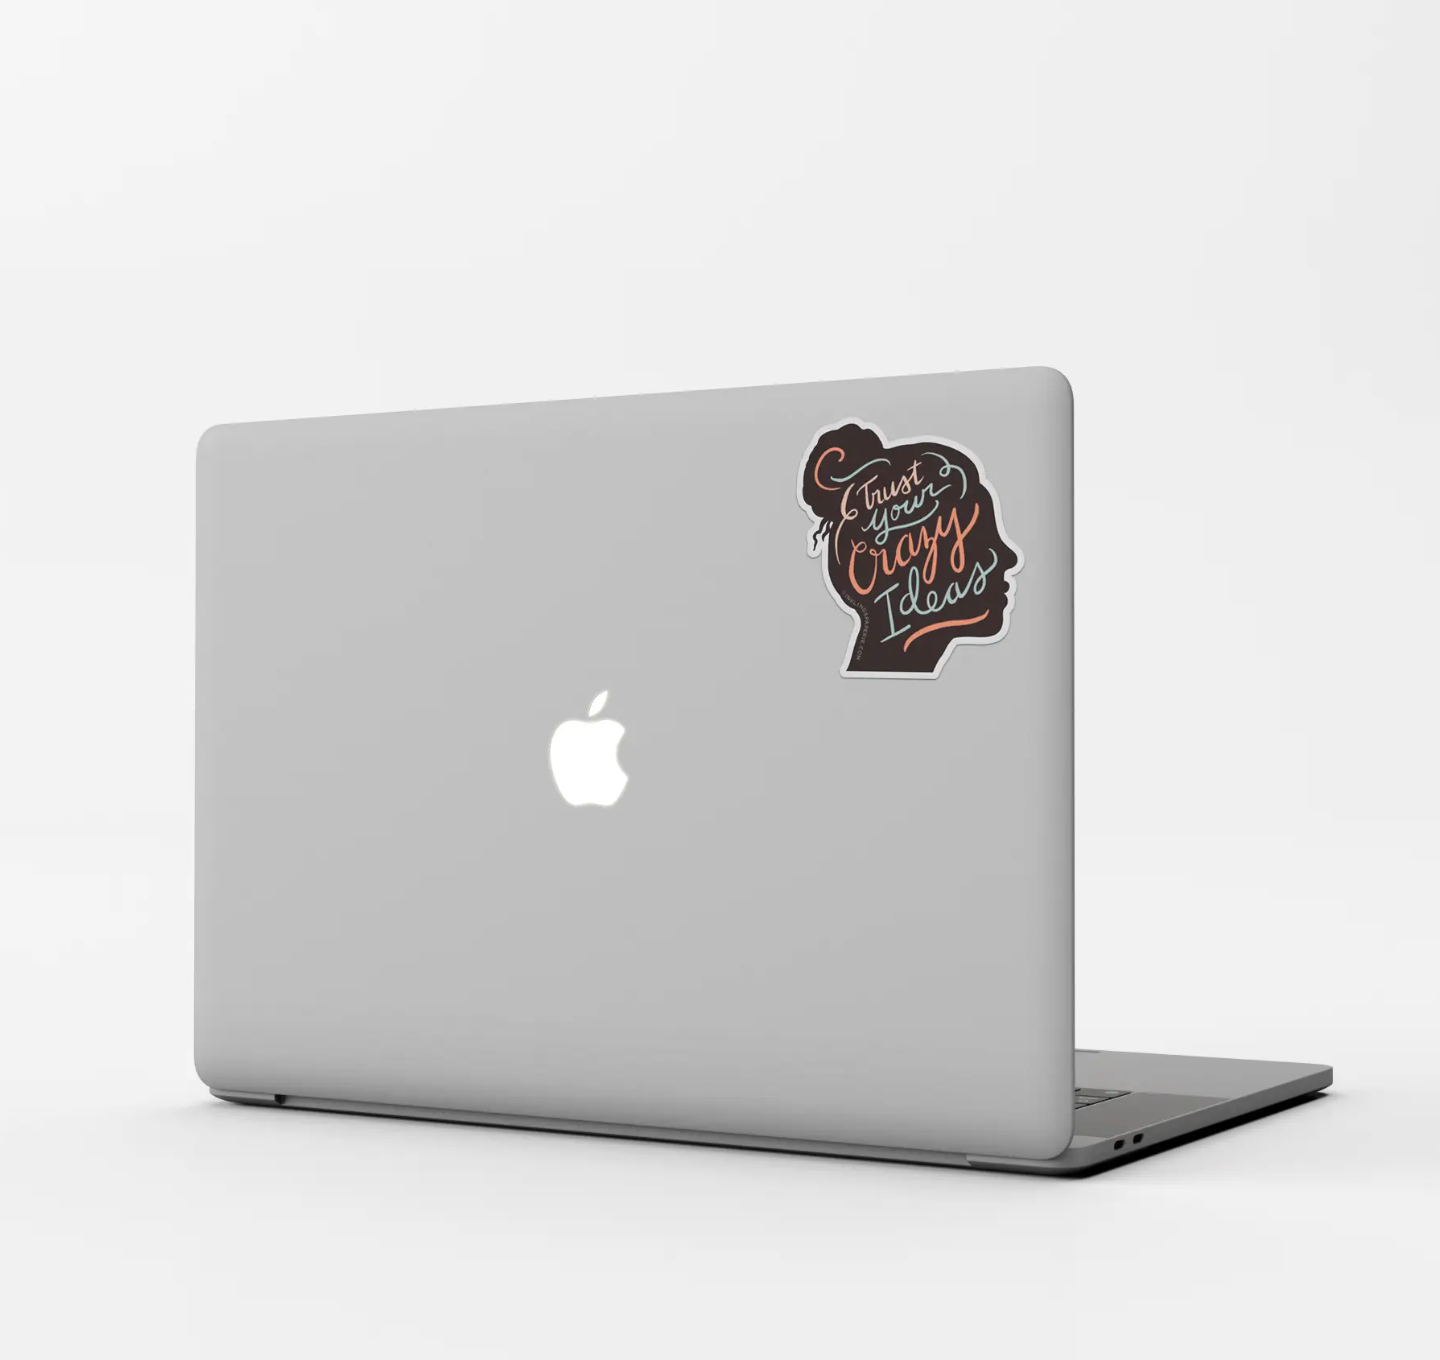 Load image into Gallery viewer, Trust Your Crazy Ideas - Vinyl Sticker
